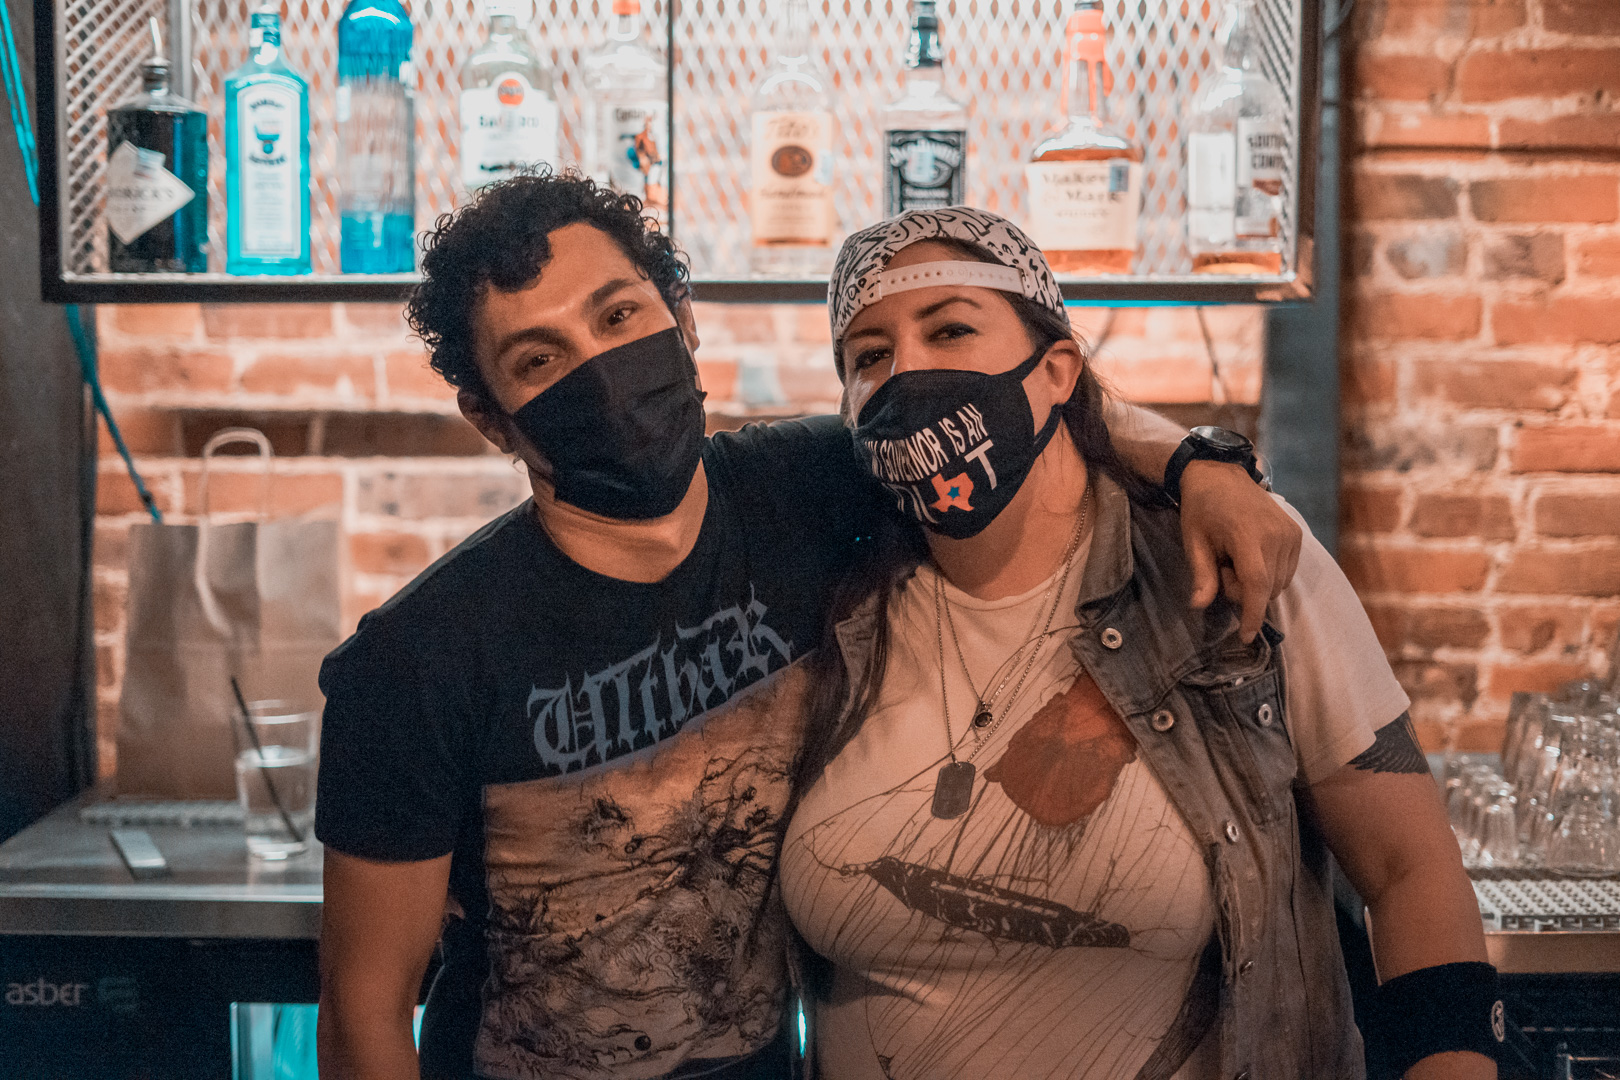 A man ad woman in face masks hug and smile